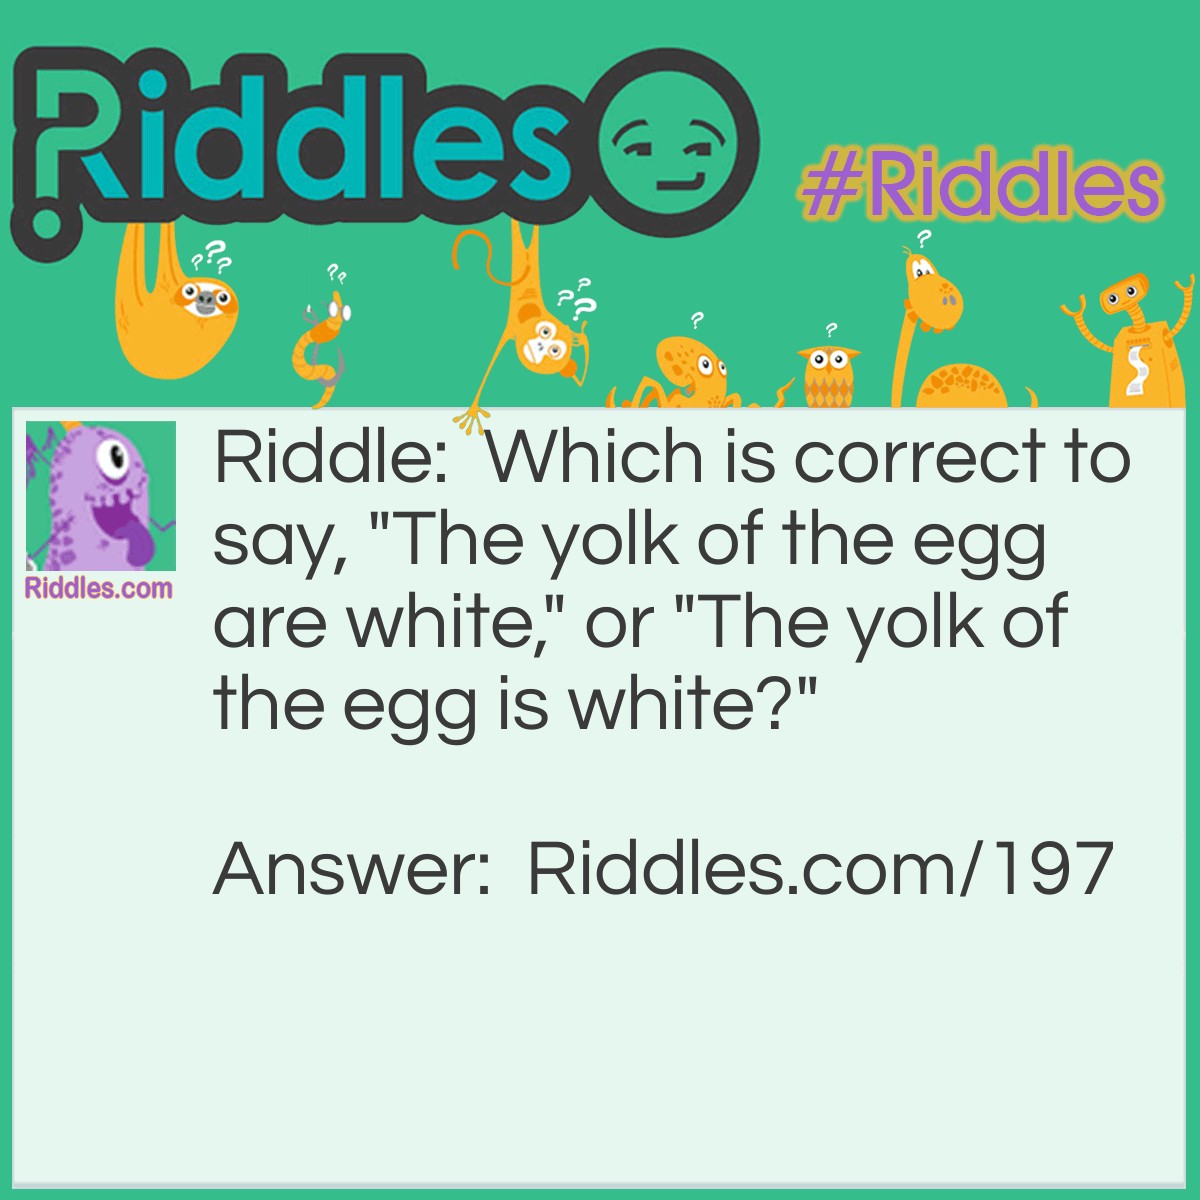 Riddle: Which is correct to say, "The yolk of the egg are white," or "The yolk of the egg is white?" Answer: Neither, because egg yolks are yellow.